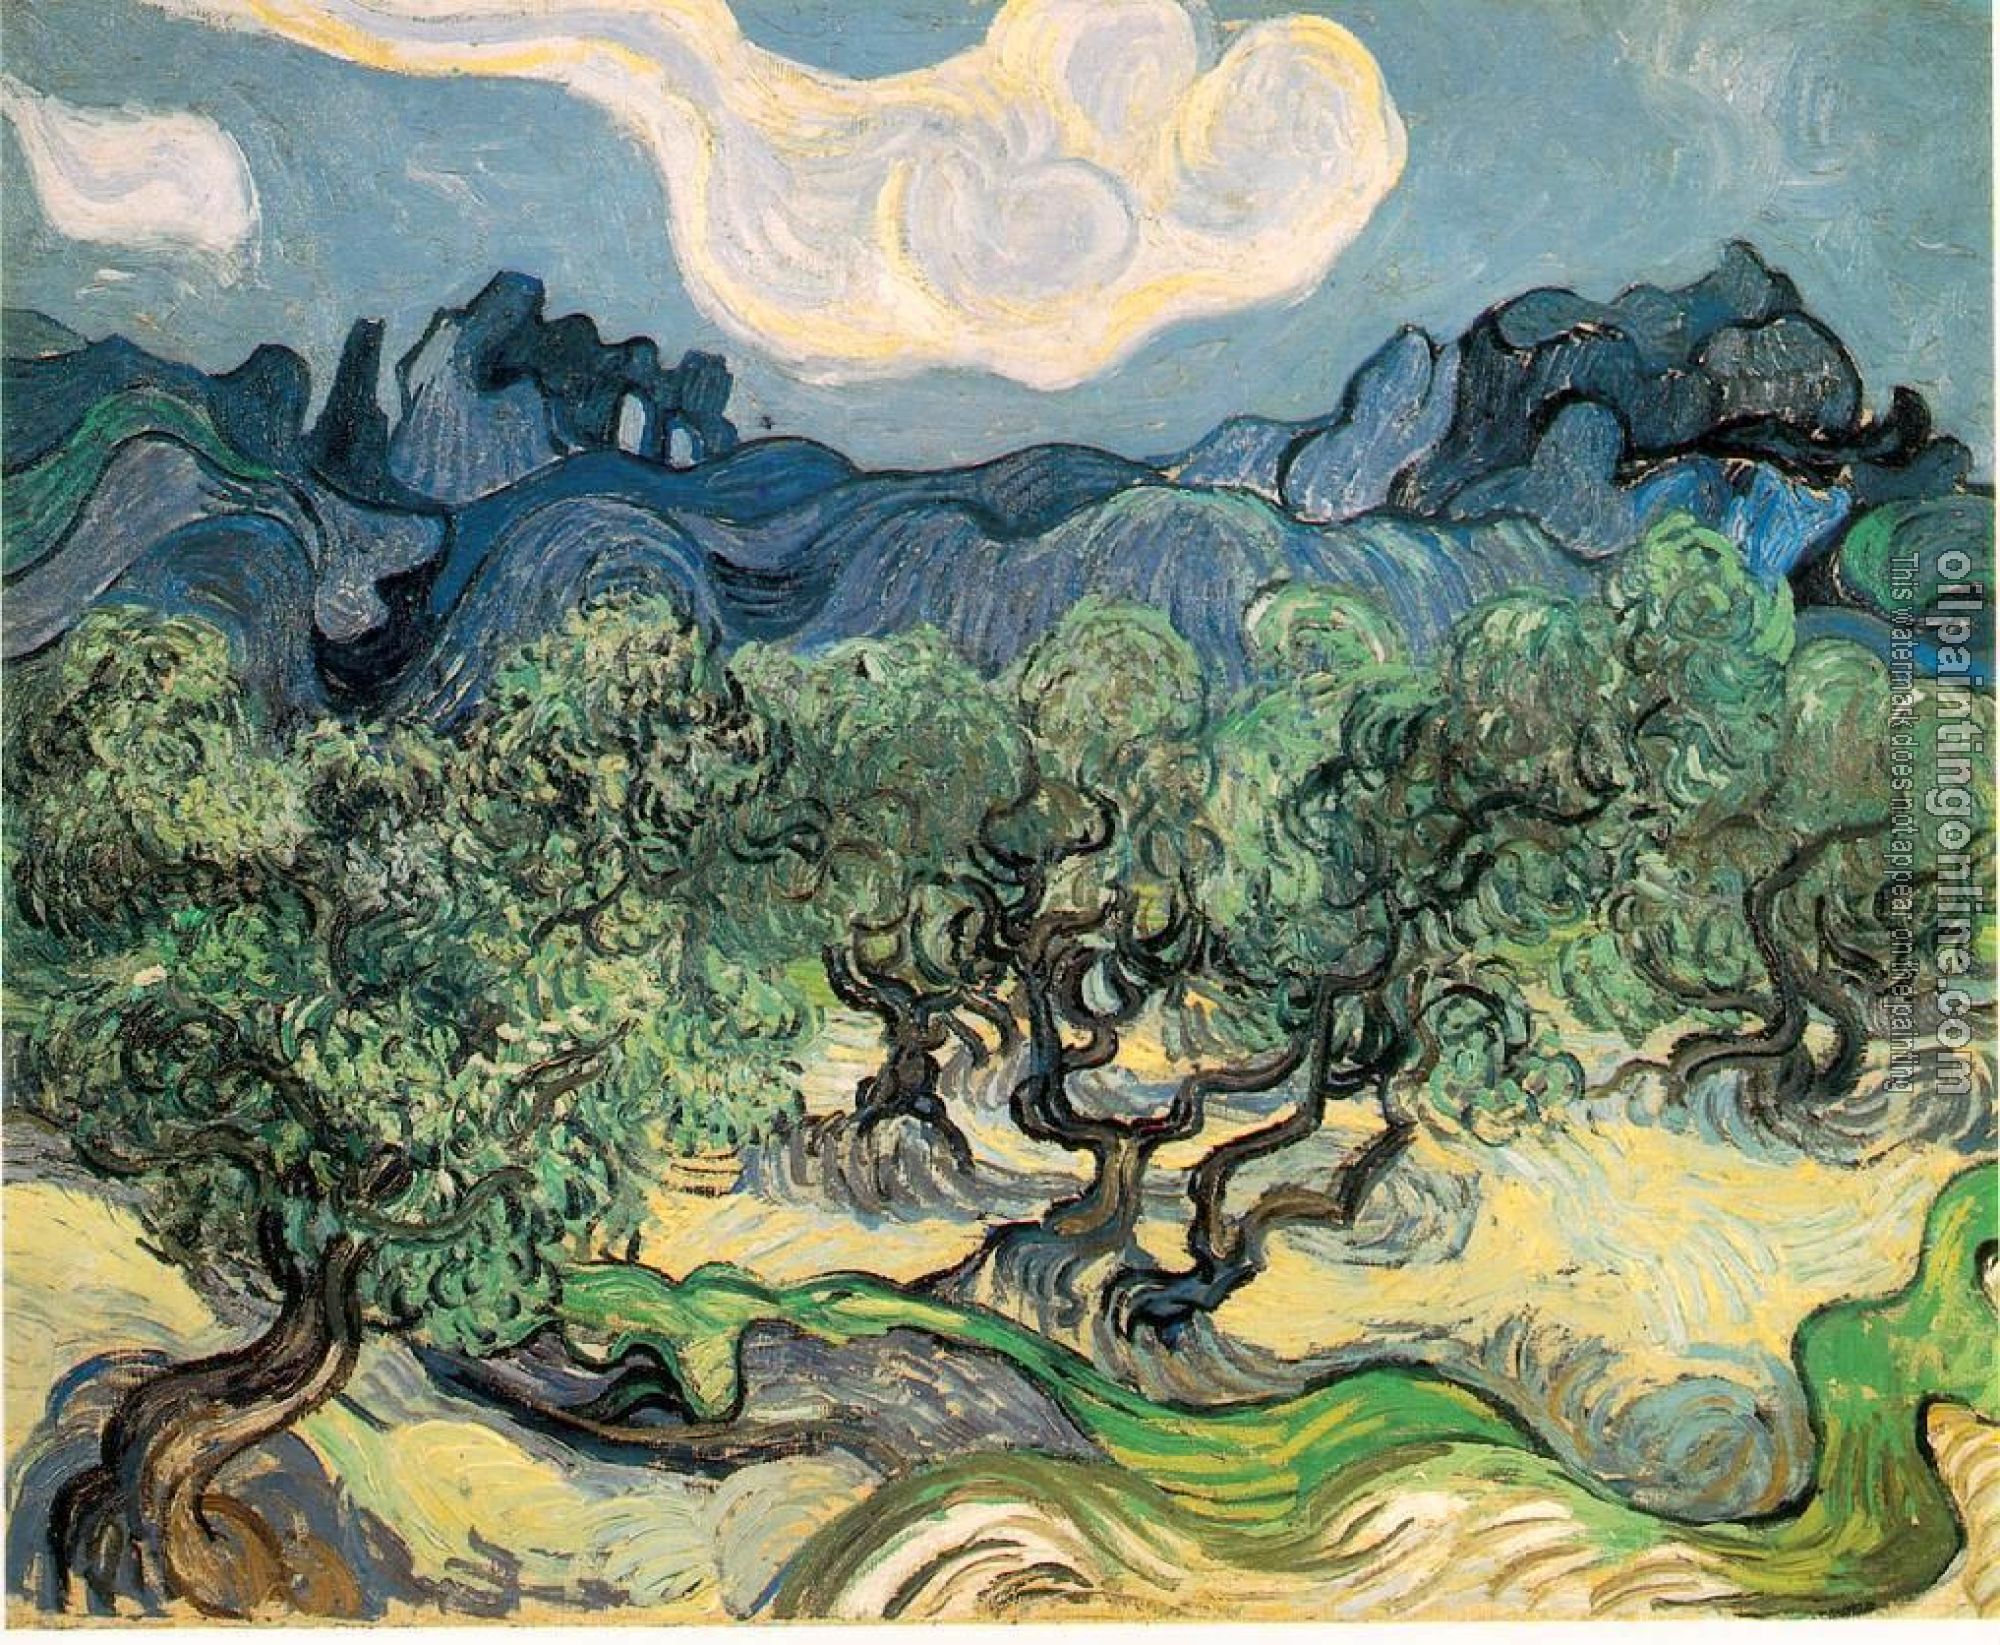 Gogh, Vincent van - Olive Trees with the Alpilles in the Background